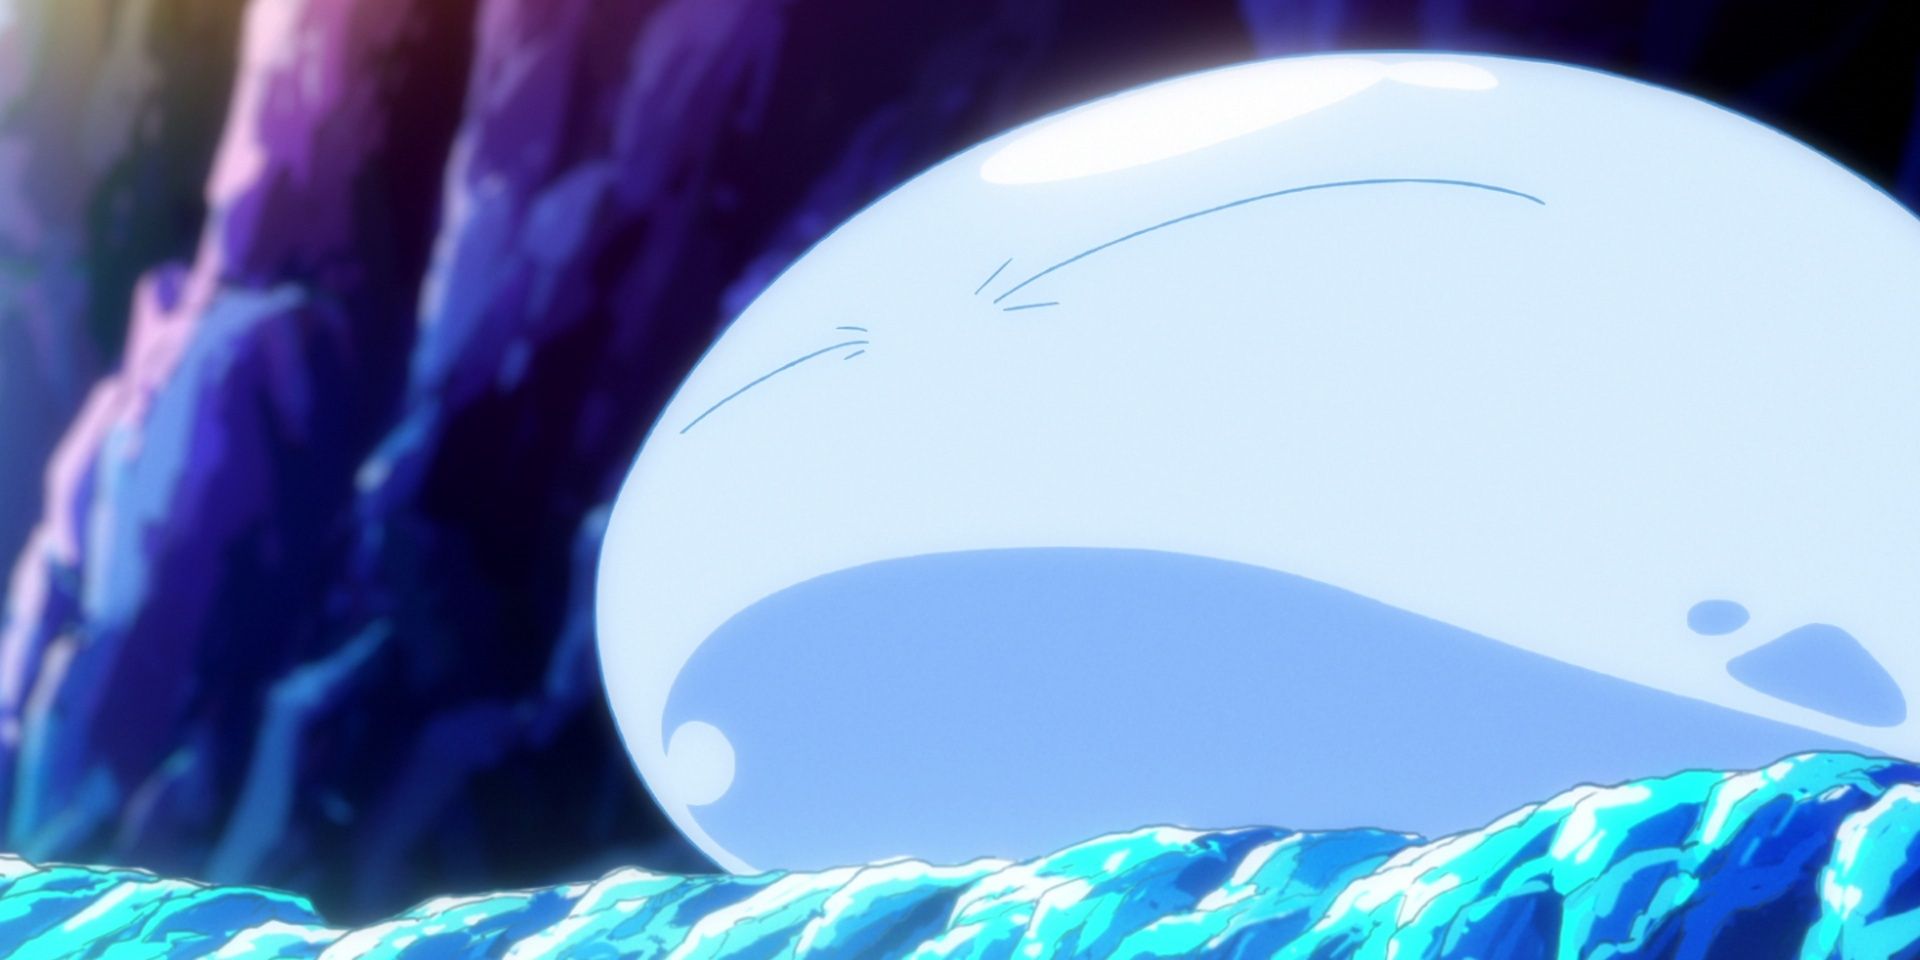 The blue slime form of Rimuru Tempest / Satoru Mikami in That Time I Was Reincarnated as a Slime